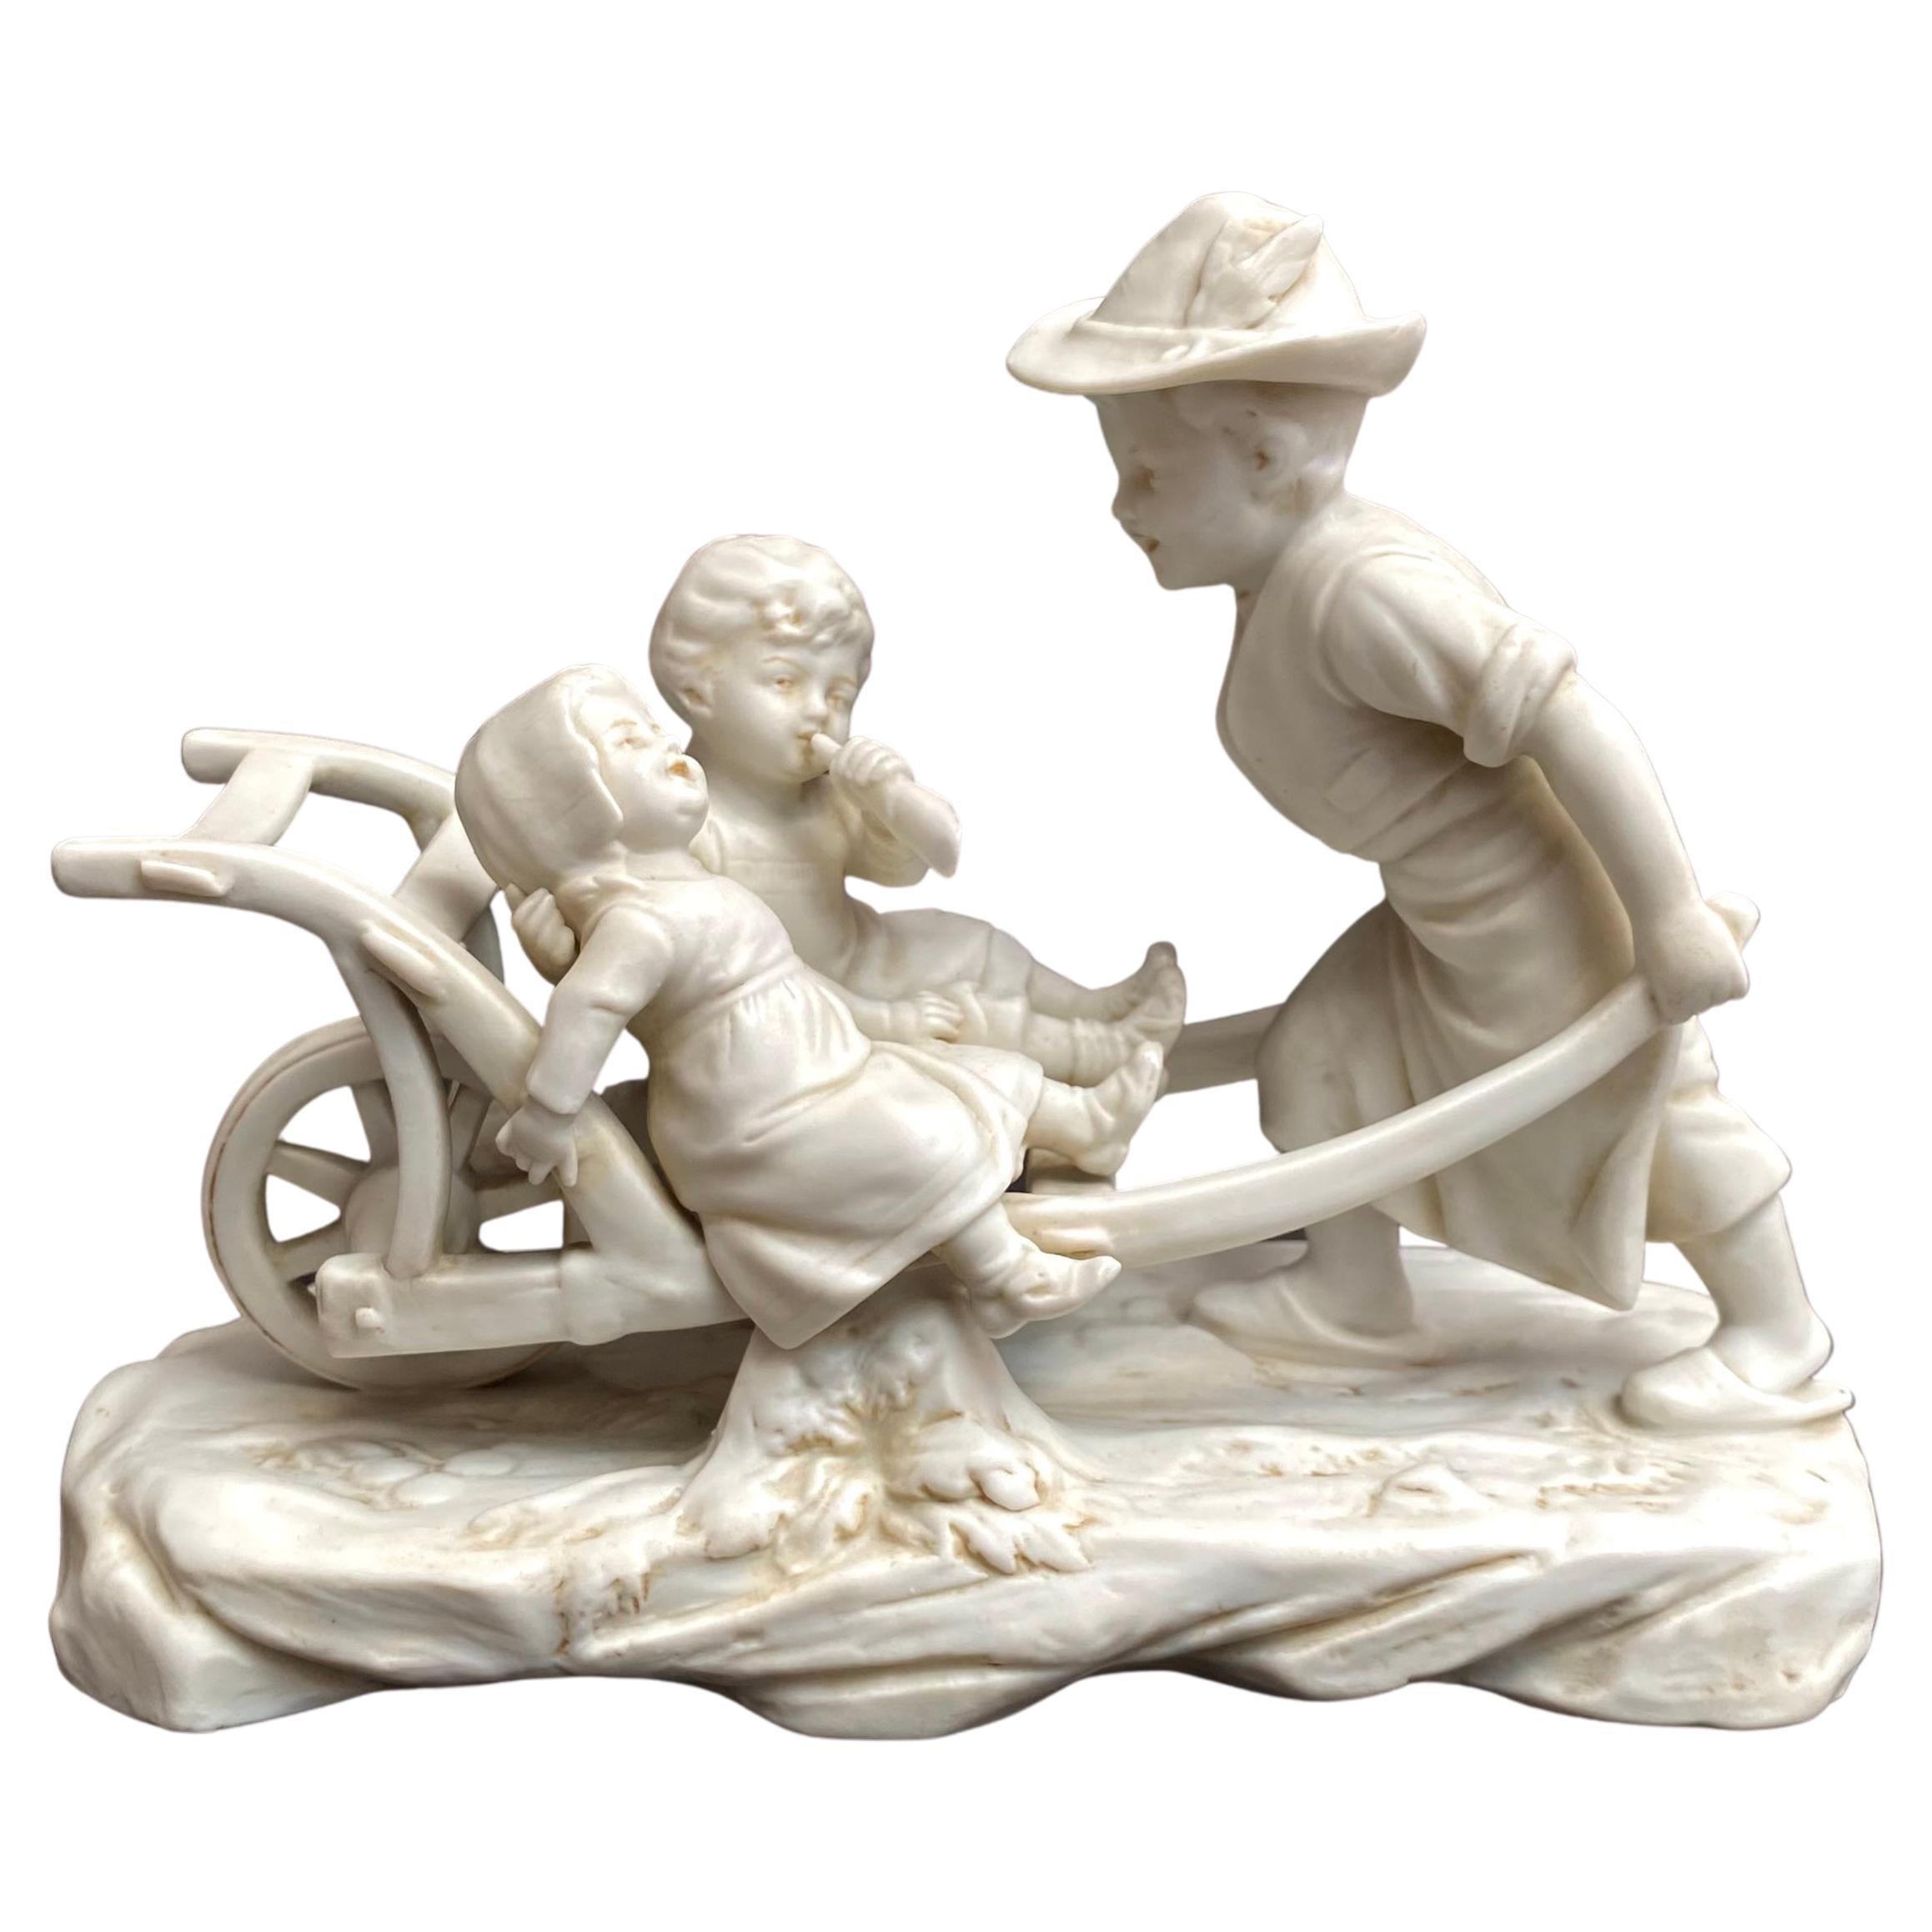 Unique Antique Figurine Lady Pulling Cart With Children, Germany, 1930s